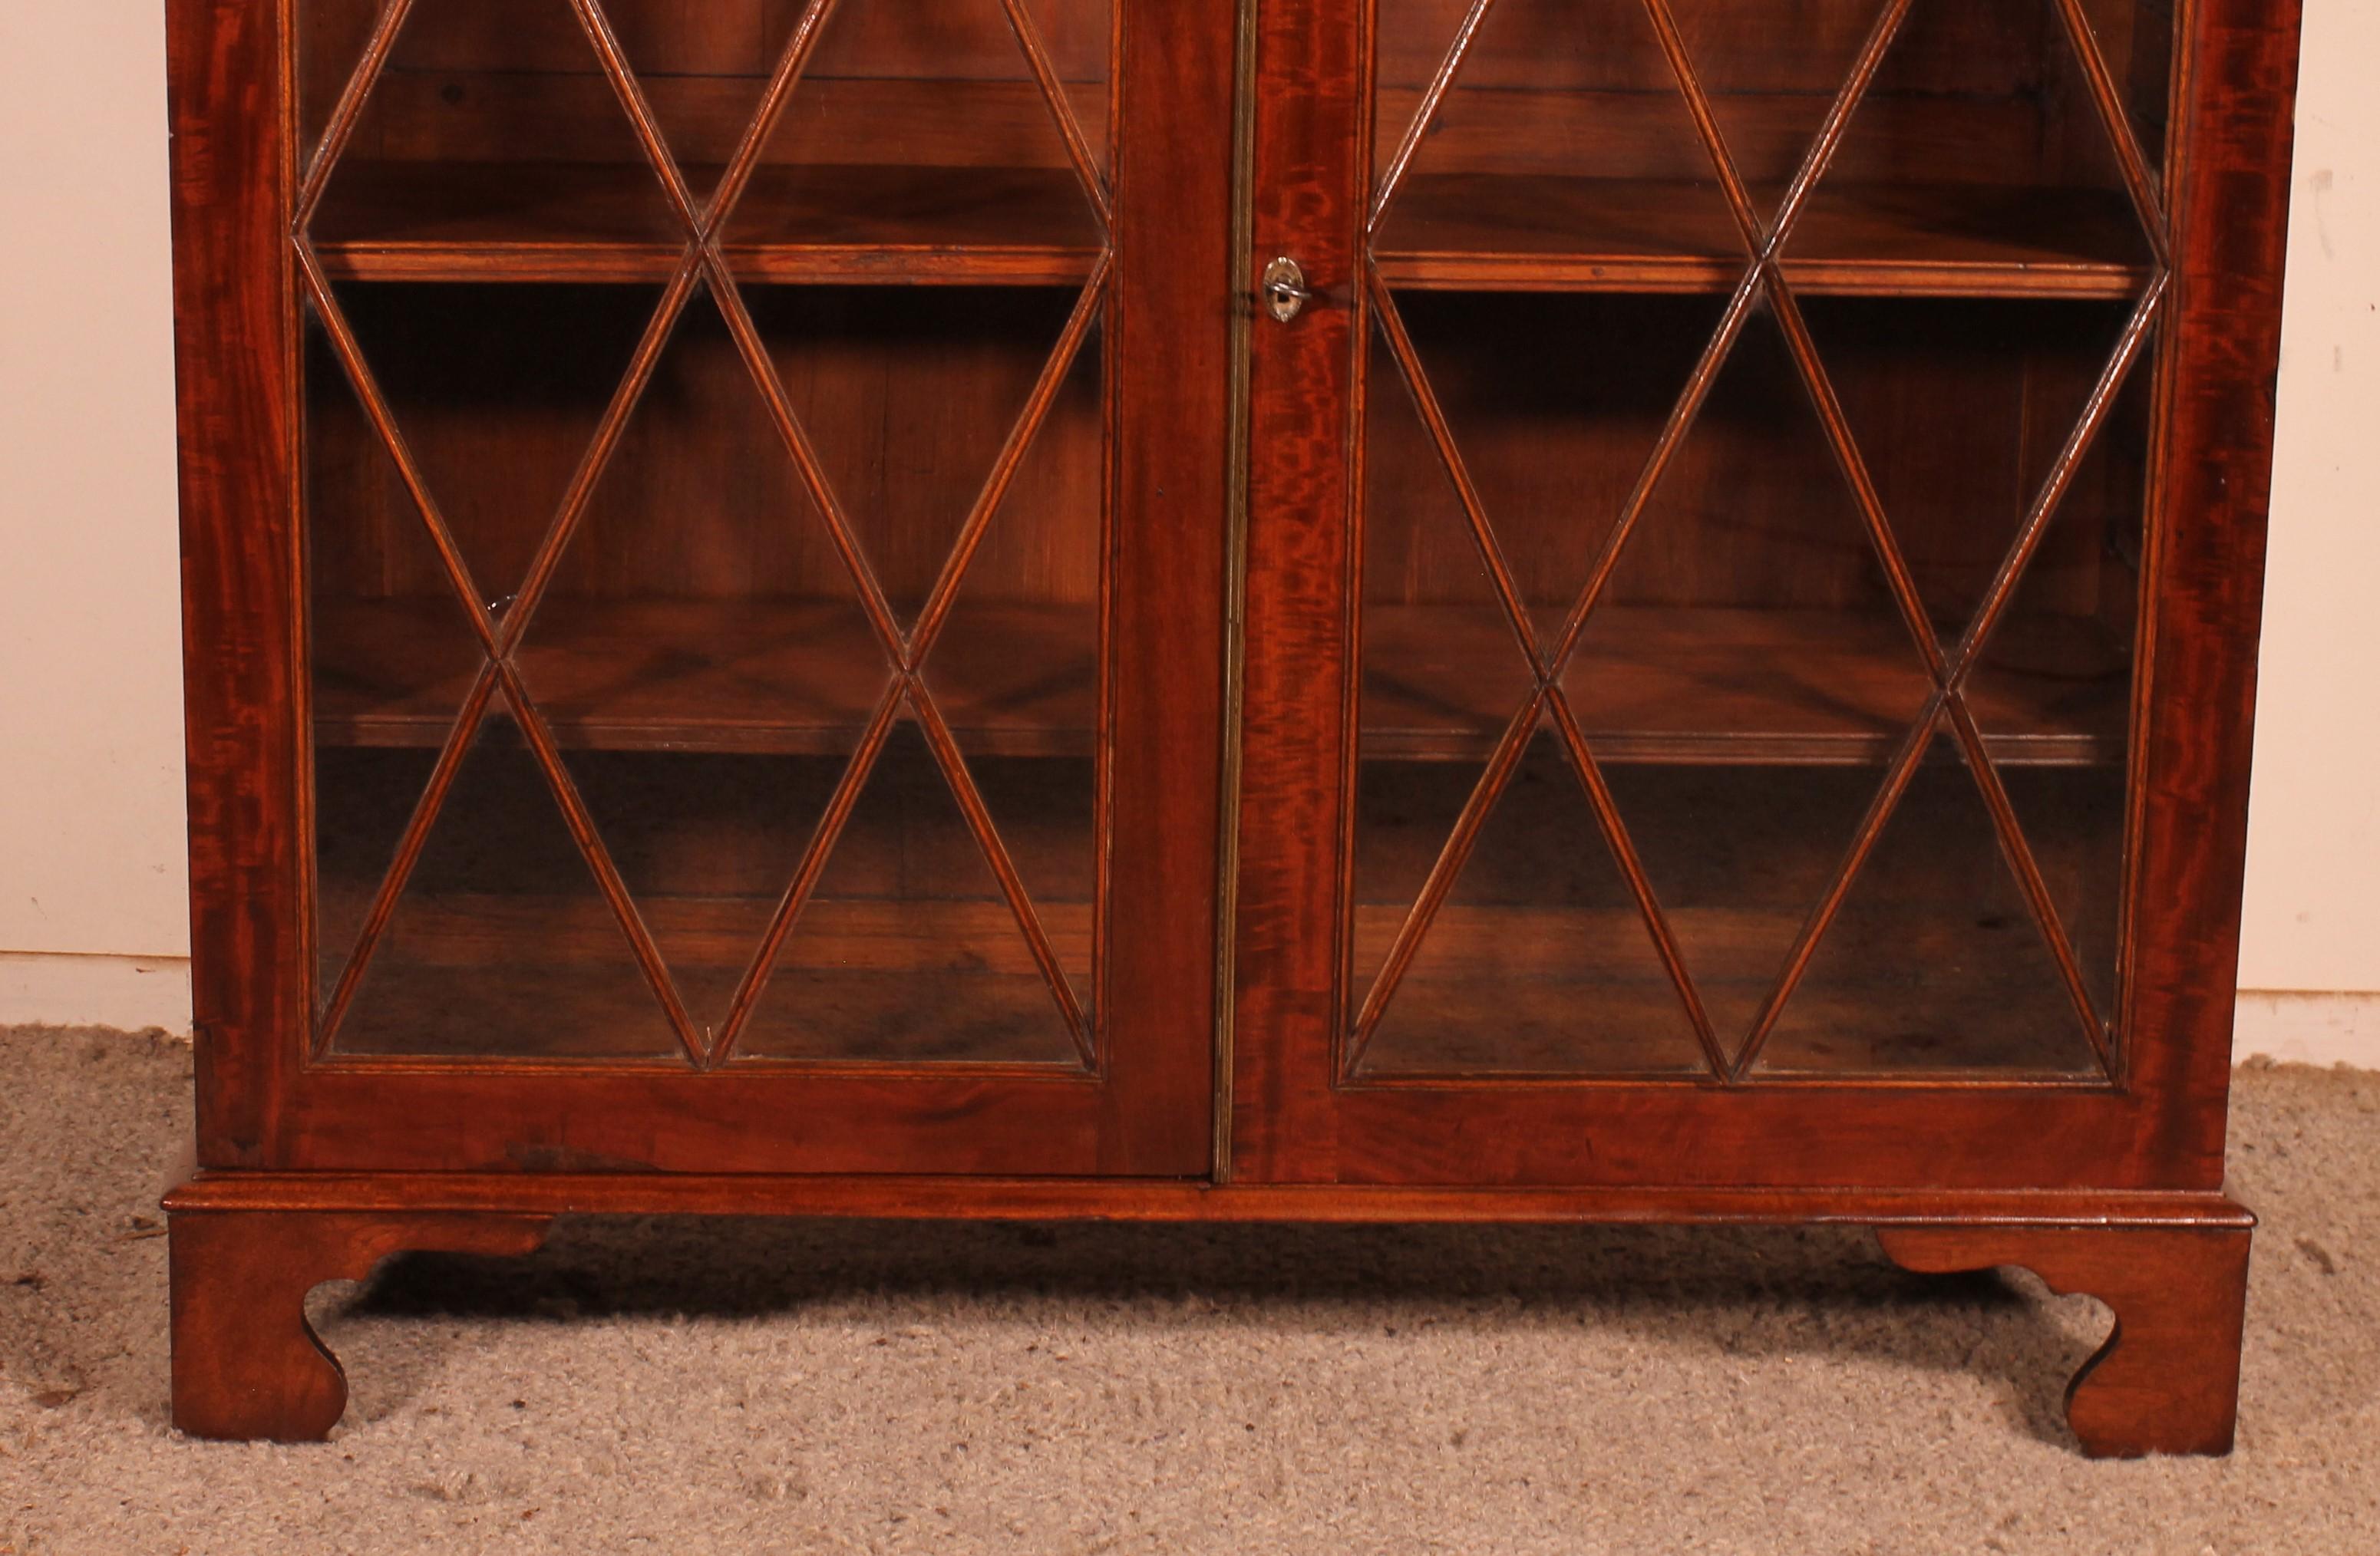 Regency Mahogany Glazed Bookcase From The 19th Century - England For Sale